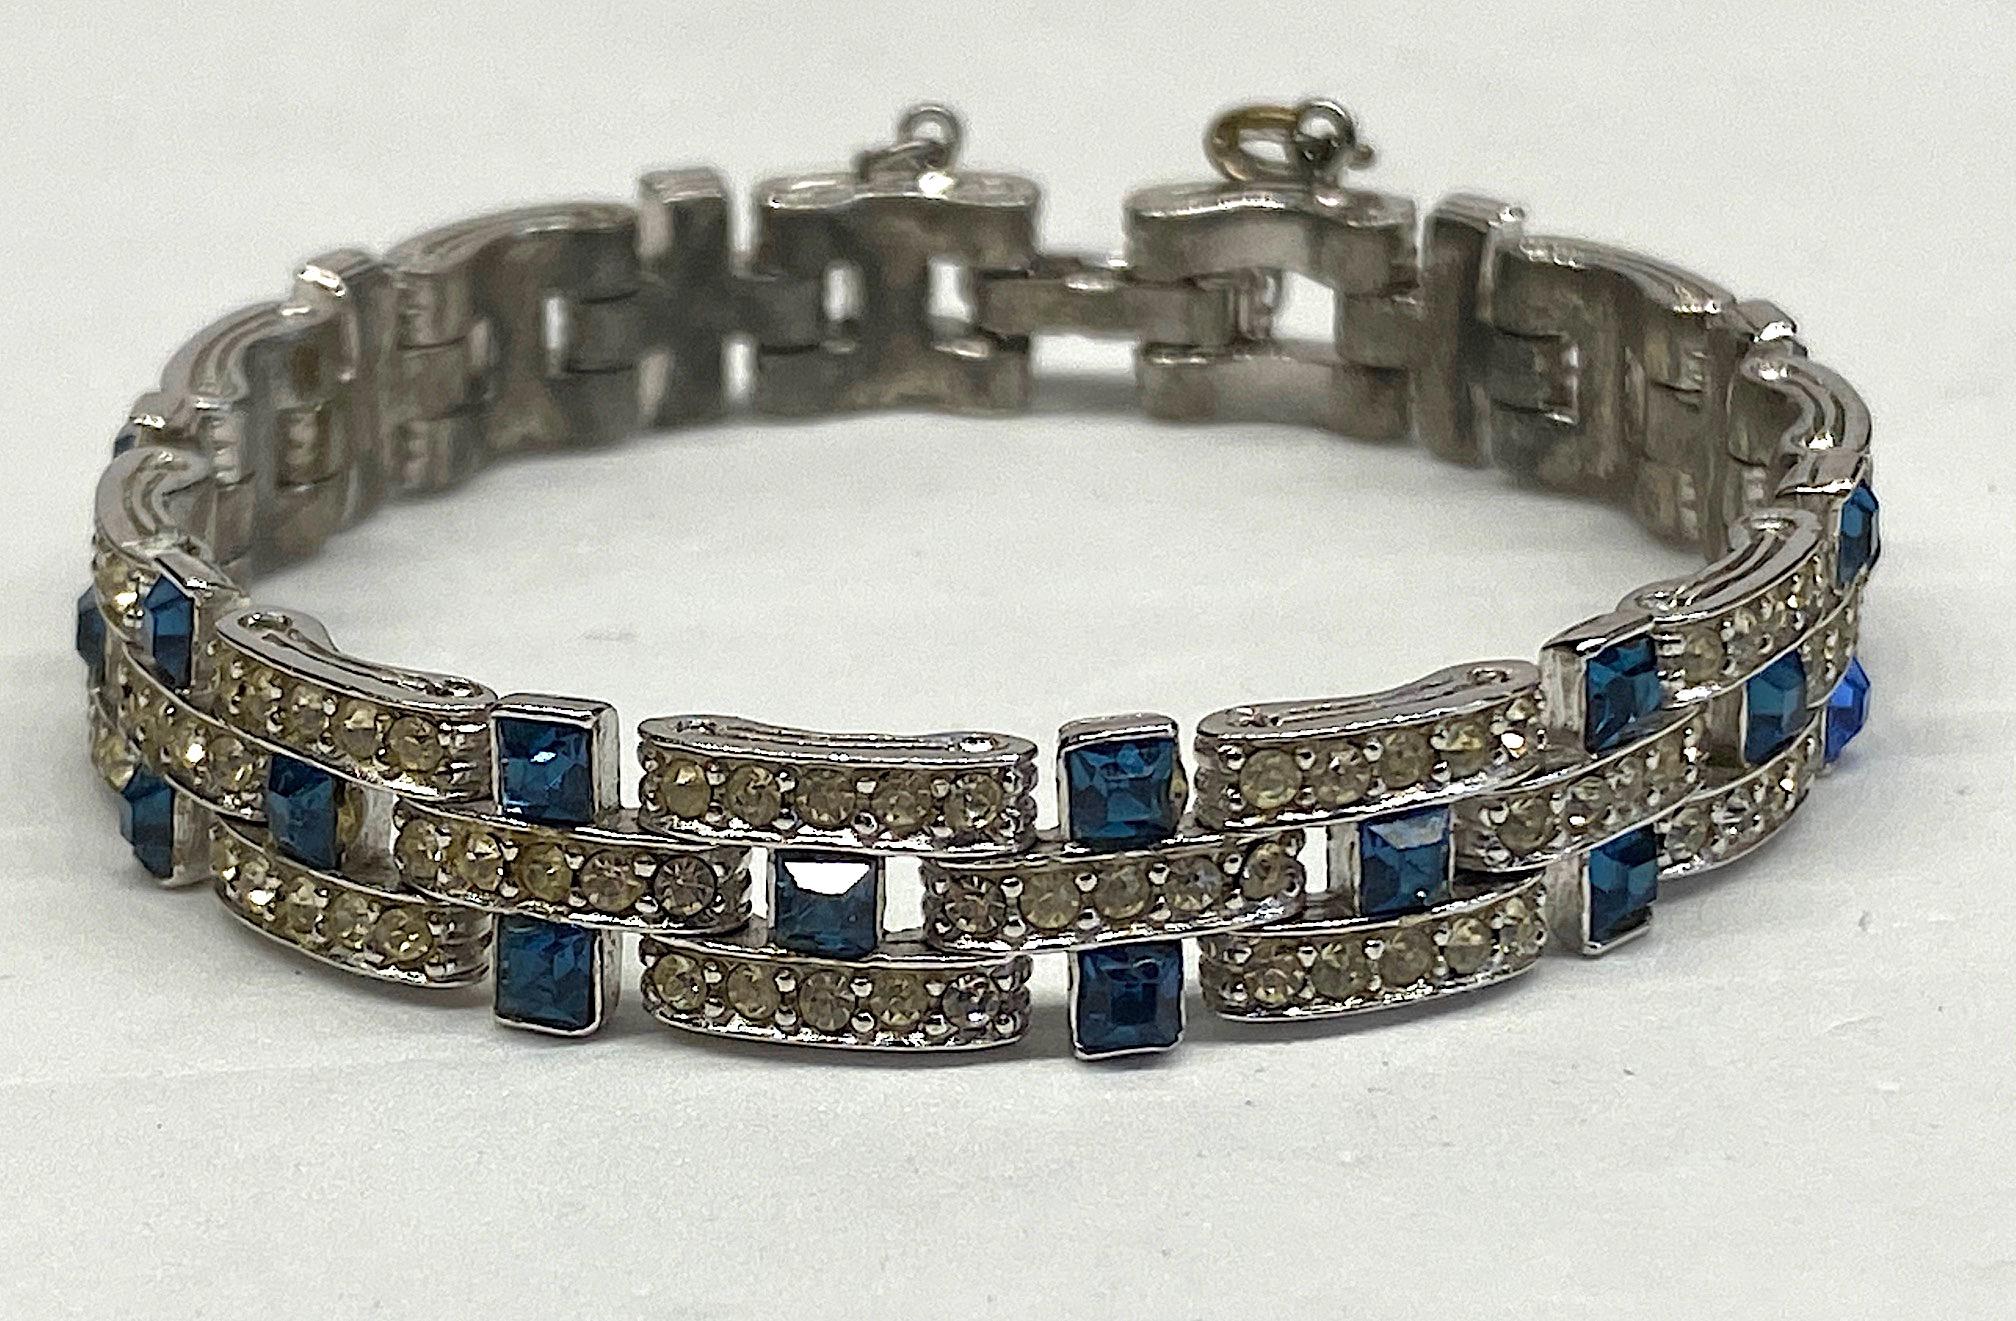 An early 1930s Art Deco bracelet by New York City fashion jewelry company Ciner. The bracelet is rhodium plate with geometric design typical of the Art Deco style of the day. The links alternate between ones shaped like an H and ones shaped like an